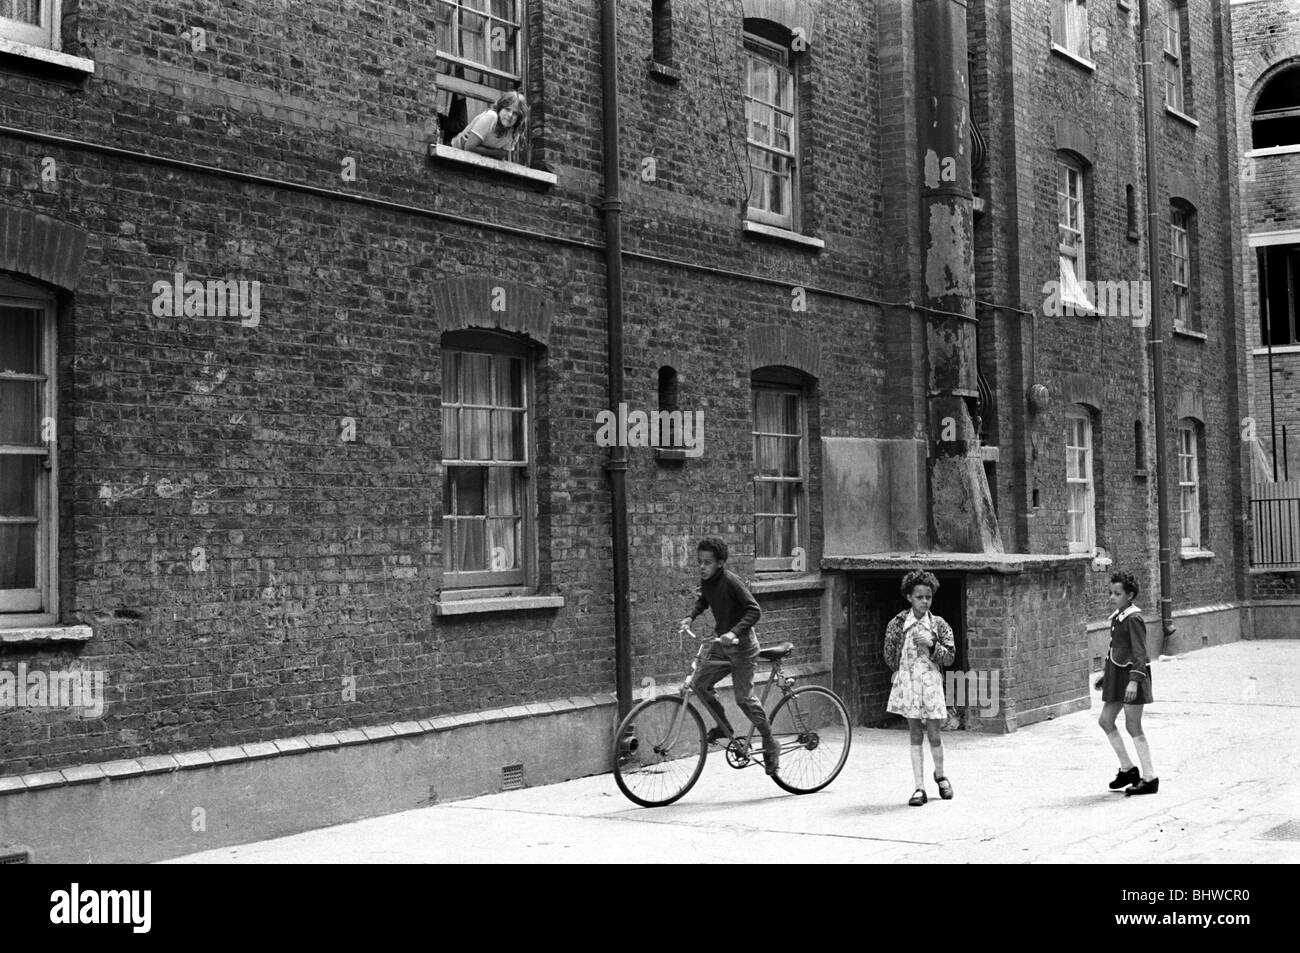 Victorian Slum Building Peabody Housing Estate. Tower Hamlets Whitechapel east London UK 1970s. Multiracial Britain, immigrant children playing in the communal area of the block of flats. 1975  HOMER SYKES Stock Photo